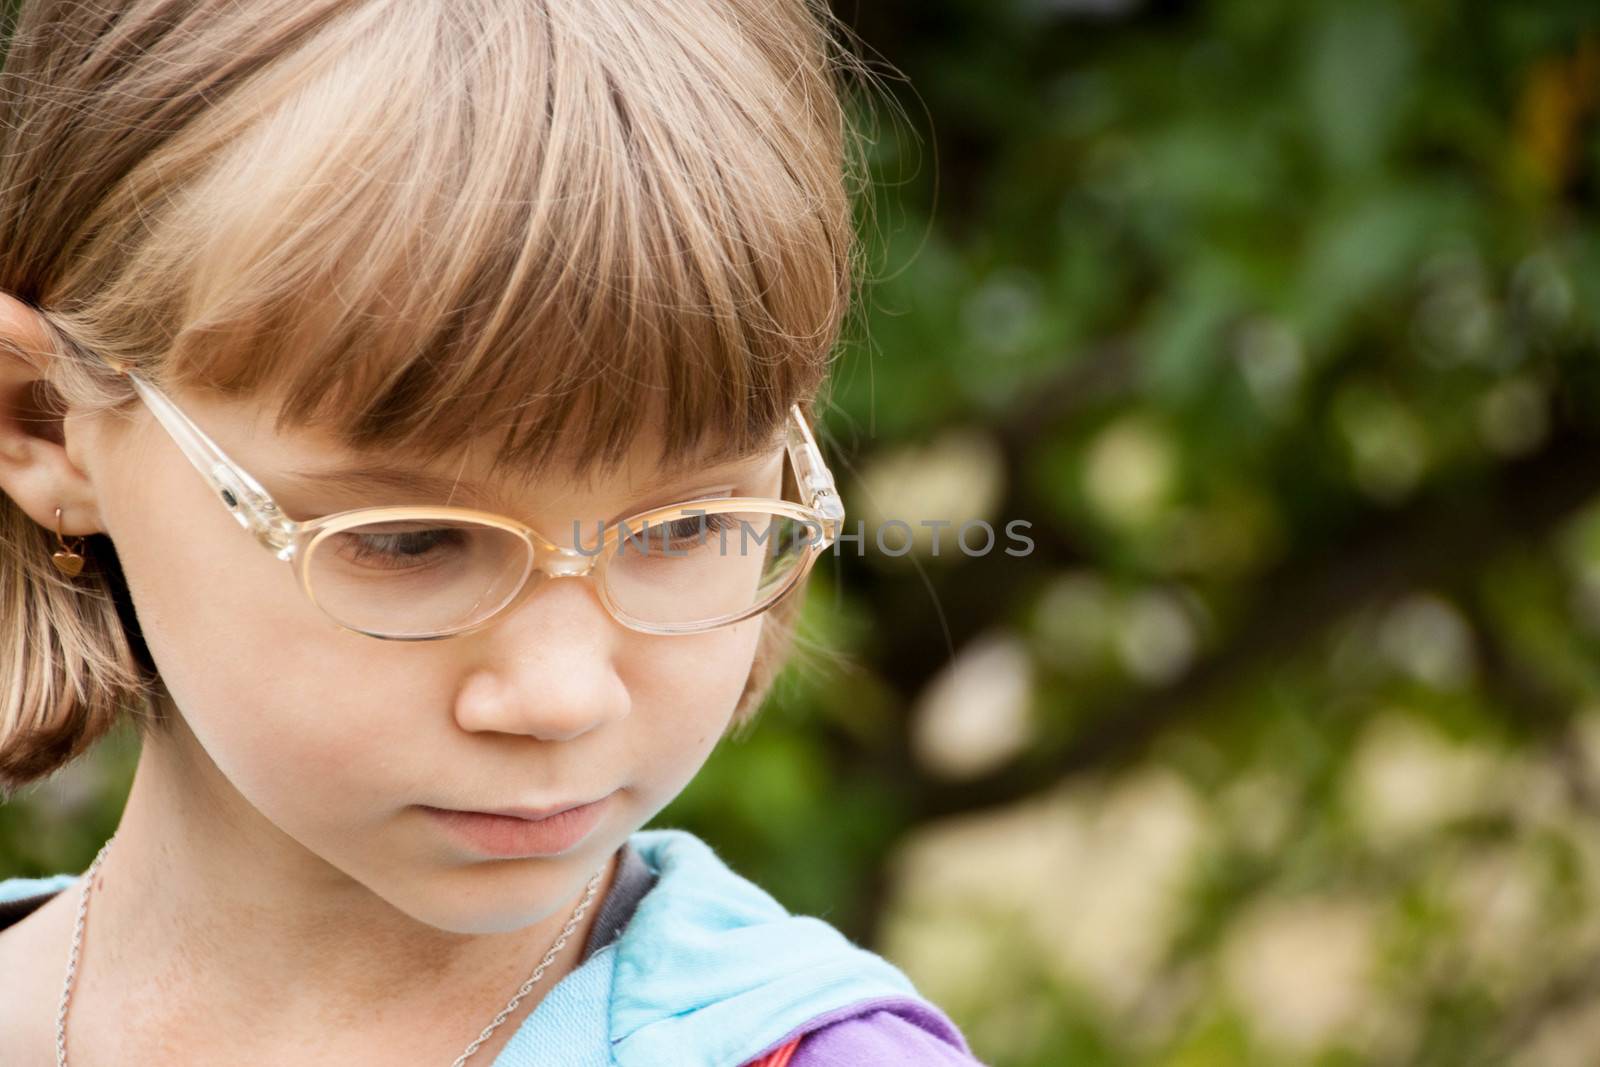  little blond girl with glasses by alexx60